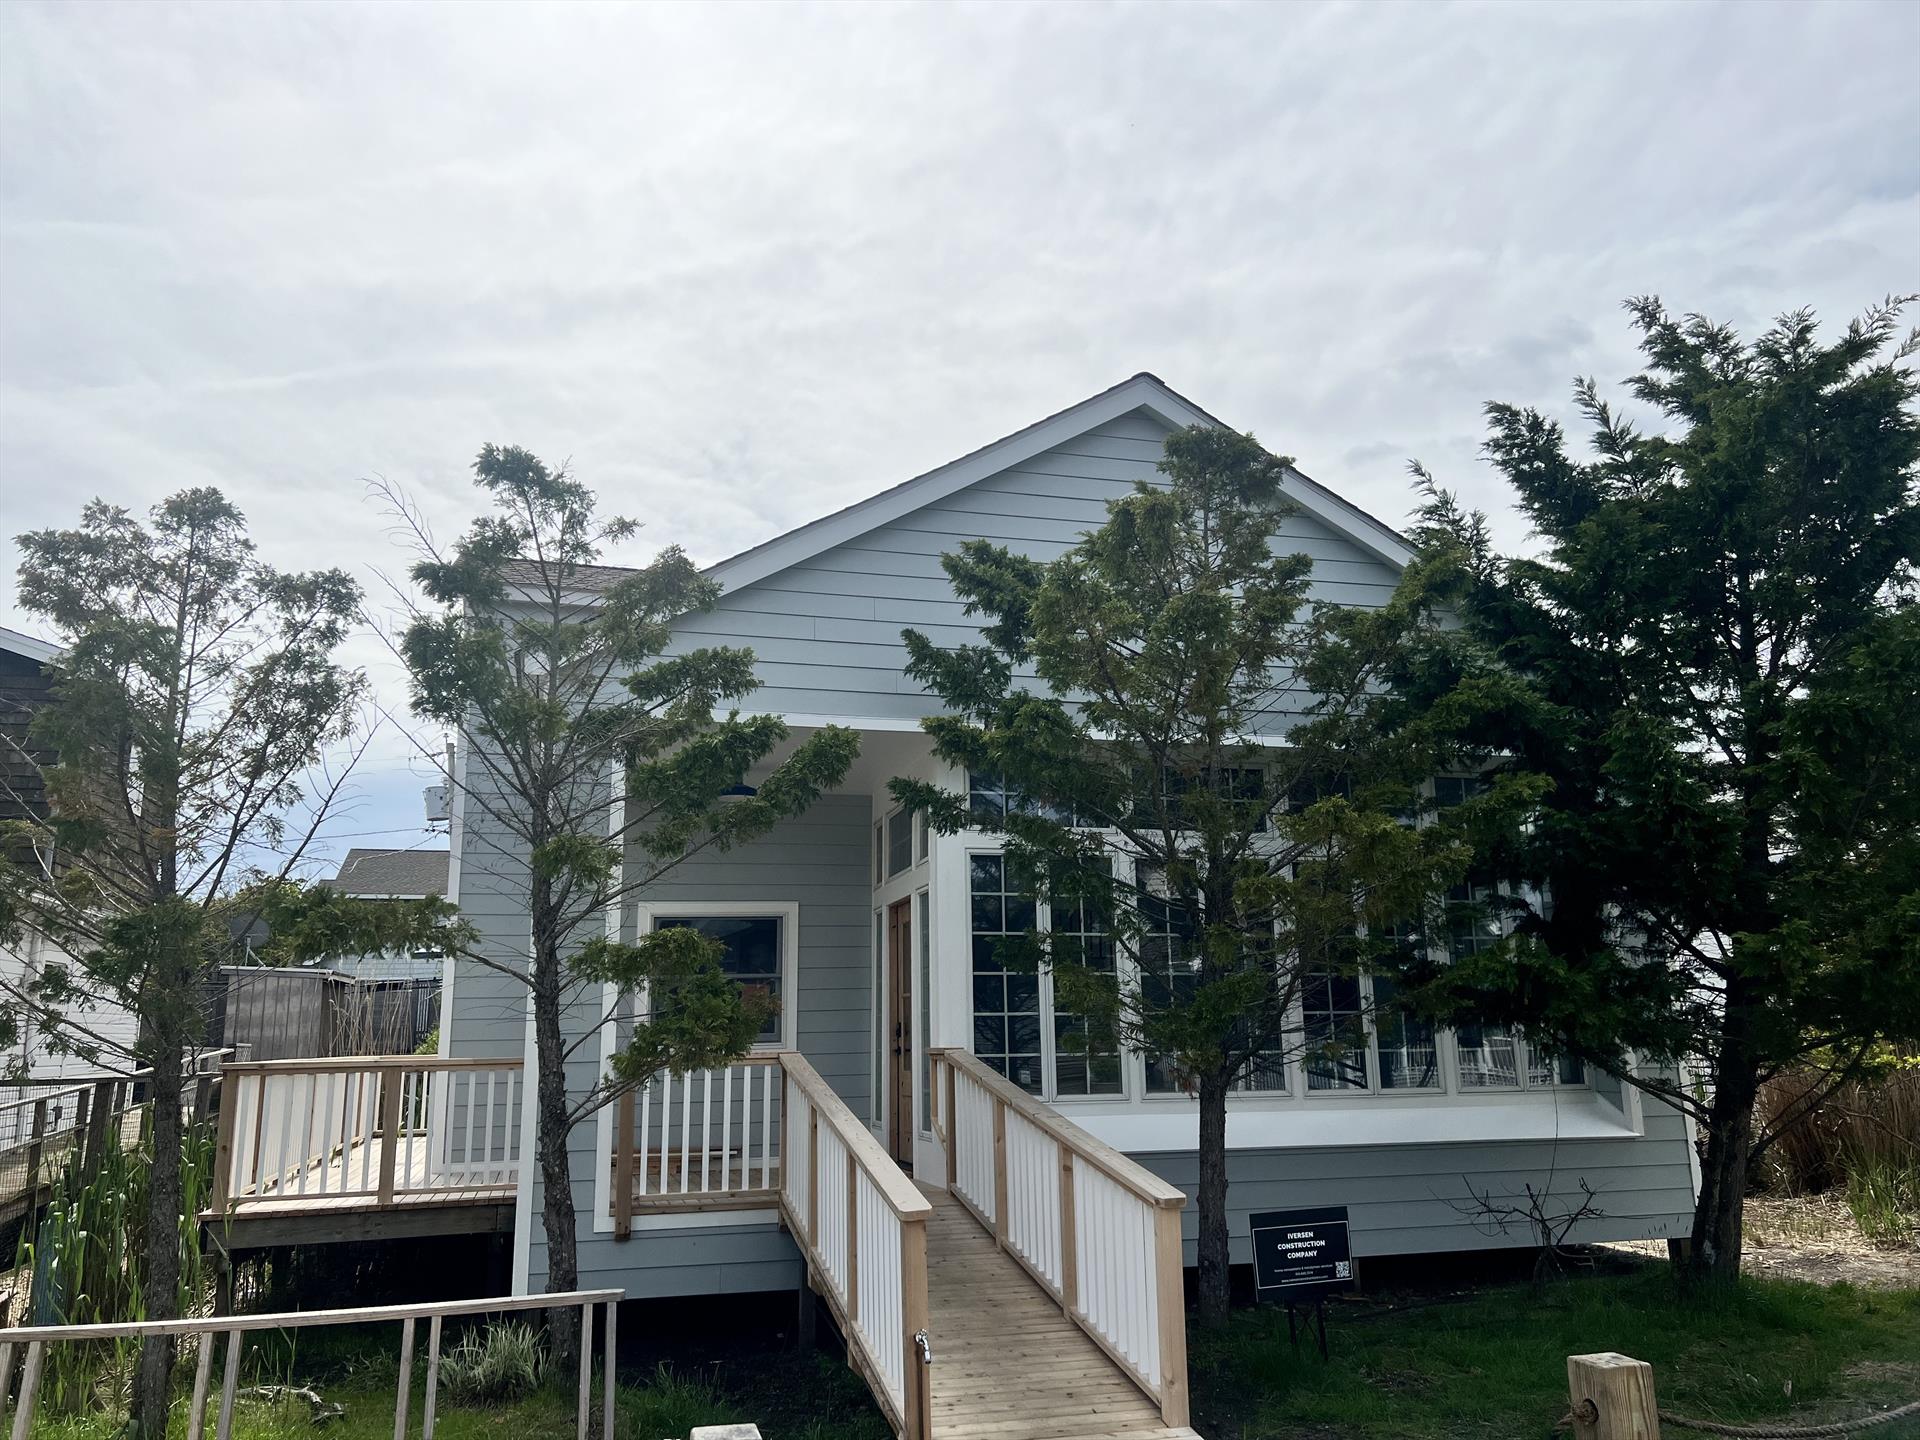 Situated on one of Ocean Beach’s most desirable streets, this completely renovated home is on an oversized 50’X104’ lot.  With 2,020 SF of living space, 4 bedrooms plus an office/flex space, and 3 full bathrooms, 310 Wilmot has plenty of room for your whole crew!  From the covered entry porch to the inviting sunroom, this home’s charms are immediately evident.  Continue on into the spectacular, sun-flooded great room to appreciate the beautiful soaring ceilings and airy, wide open space.  Completely redone from top to bottom, this home features all new roof, siding, decking, HVAC, and flooring.  The all new Hardie plank siding is fire, weather, and insect resistant so you can spend your time at the beach relaxing rather than worrying about the upkeep of your home.  The brand new kitchen has ample storage, gorgeous GE Cafe appliances, an island with breakfast bar, and quartz countertops.  Rounding out the first floor are 3 spacious bedrooms (one of which is a “mini master” with its own en-suite bathroom and room for a King sized bed), laundry, large hall bath, and storage area.  The second floor of the home is dedicated to the enormous primary suite.  With soaring gabled ceilings, walls of closets, spacious en-suite bathroom with dual sinks & custom walk-in shower, and your own private terrace overlooking the pool area, this suite has it all.  The flex space on the second floor is perfect for a gym, office, art studio, or whatever your heart desires.
The outdoor space in this home is just as fabulous as the indoors, with a large back deck featuring a Saltwater swimming pool, outdoor kitchen with grill, sink, and fridge, dining area with built-in banquette, and ample room to lounge.  No Fire Island house would be complete without it’s outdoor shower!  Enjoy your deck in the privacy afforded by 6’ cedar slat privacy fencing around the pool deck.  Shown by appointment only, 310 Wilmot has it all!